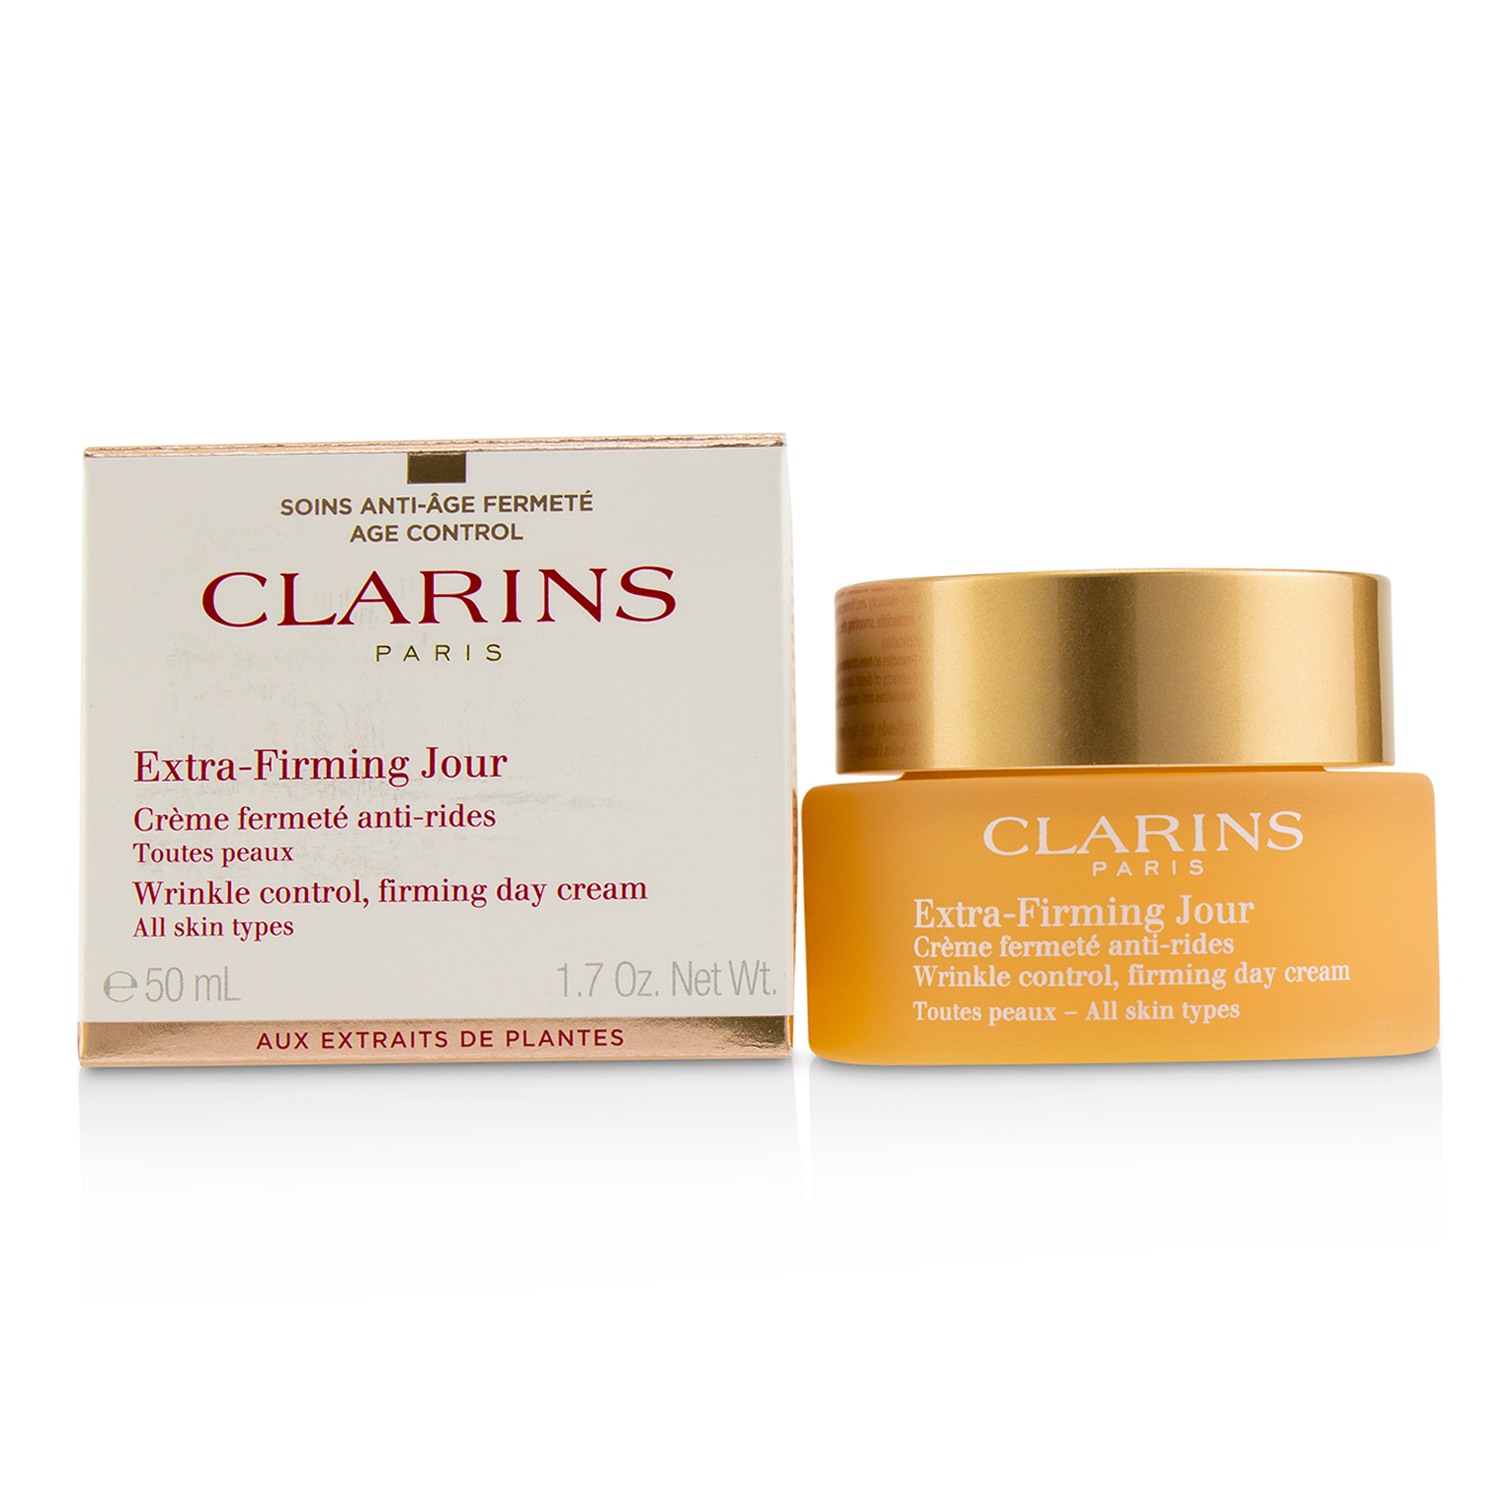 Extra-Firming Jour Wrinkle Control Firming Day Cream - All Skin Types Clarins Image